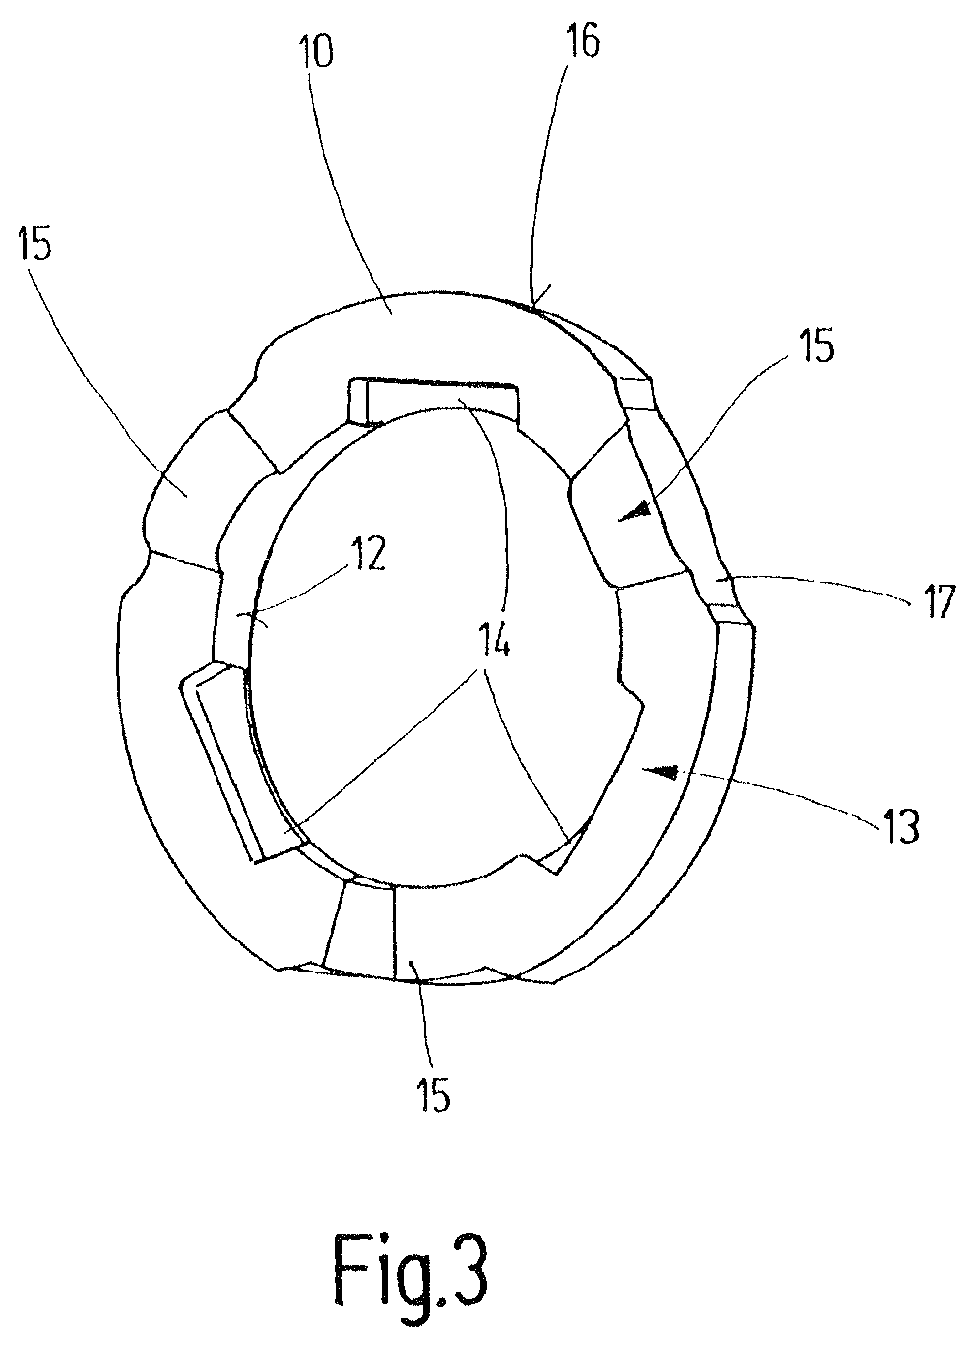 Snap-in disk and overload clutch with a snap-in disk